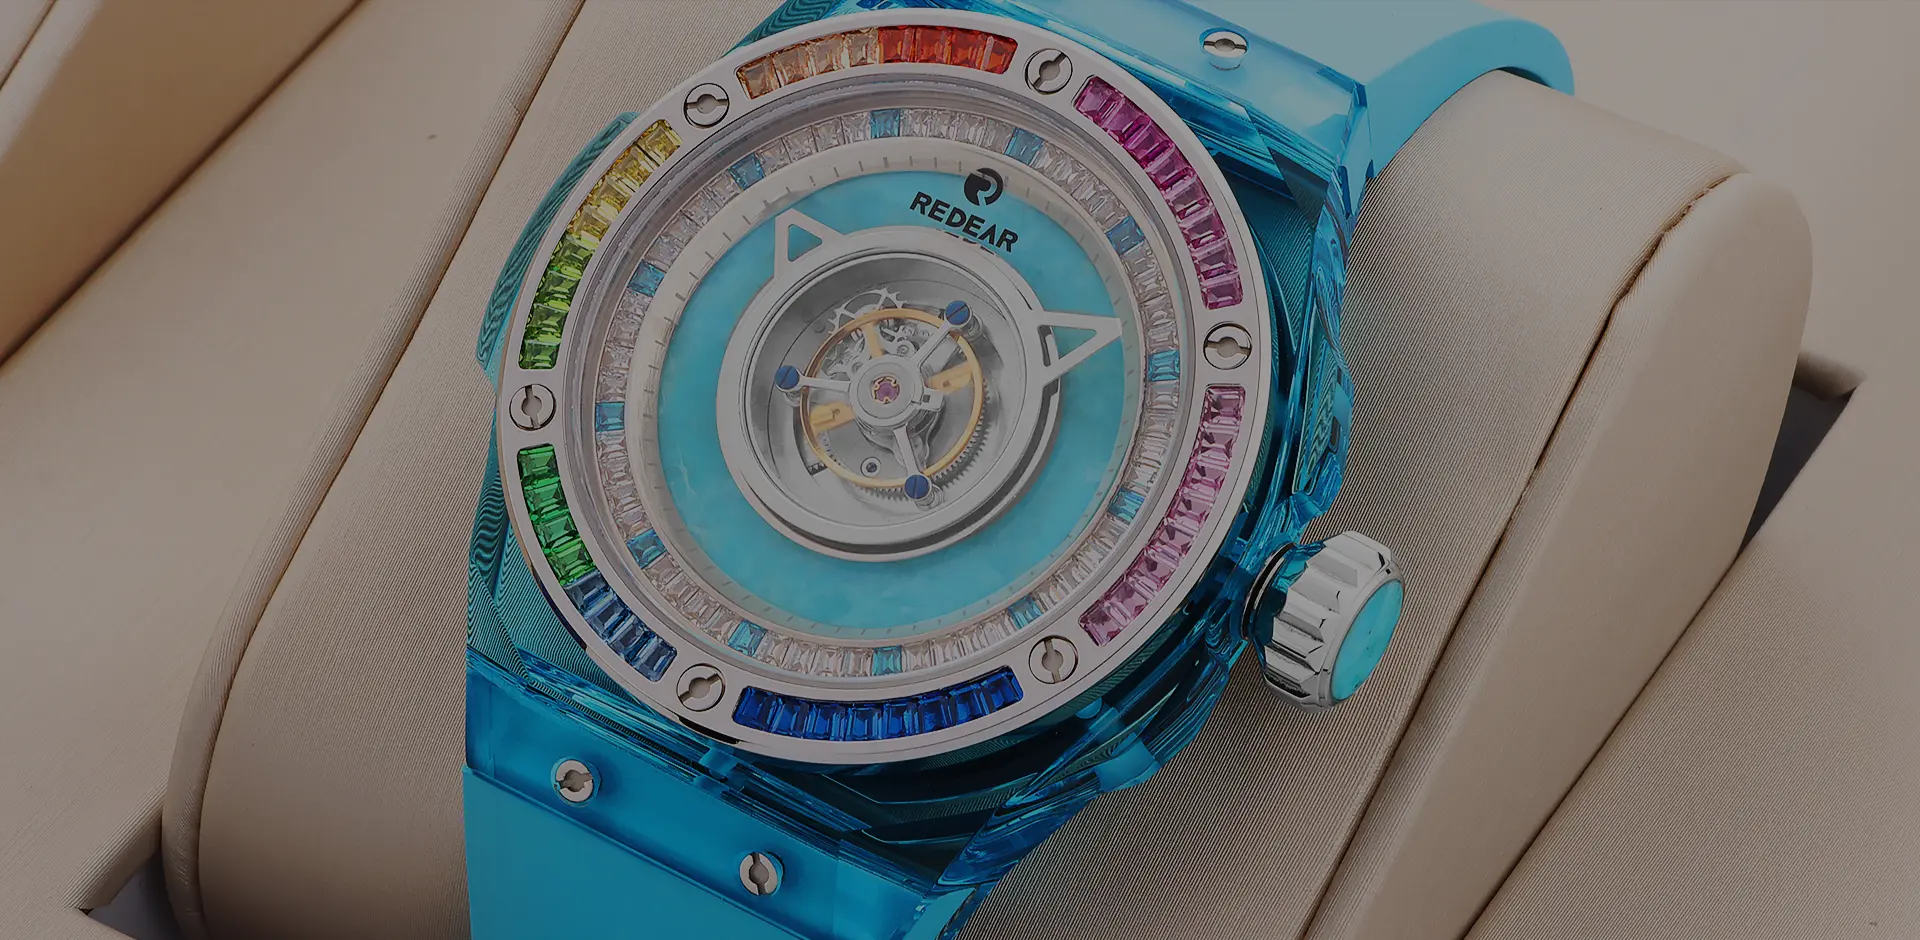 Elegant K9 Crystal Mechanical Watch With Carbon Fiber Hollowed-Out Dial & Vibrant Color Options